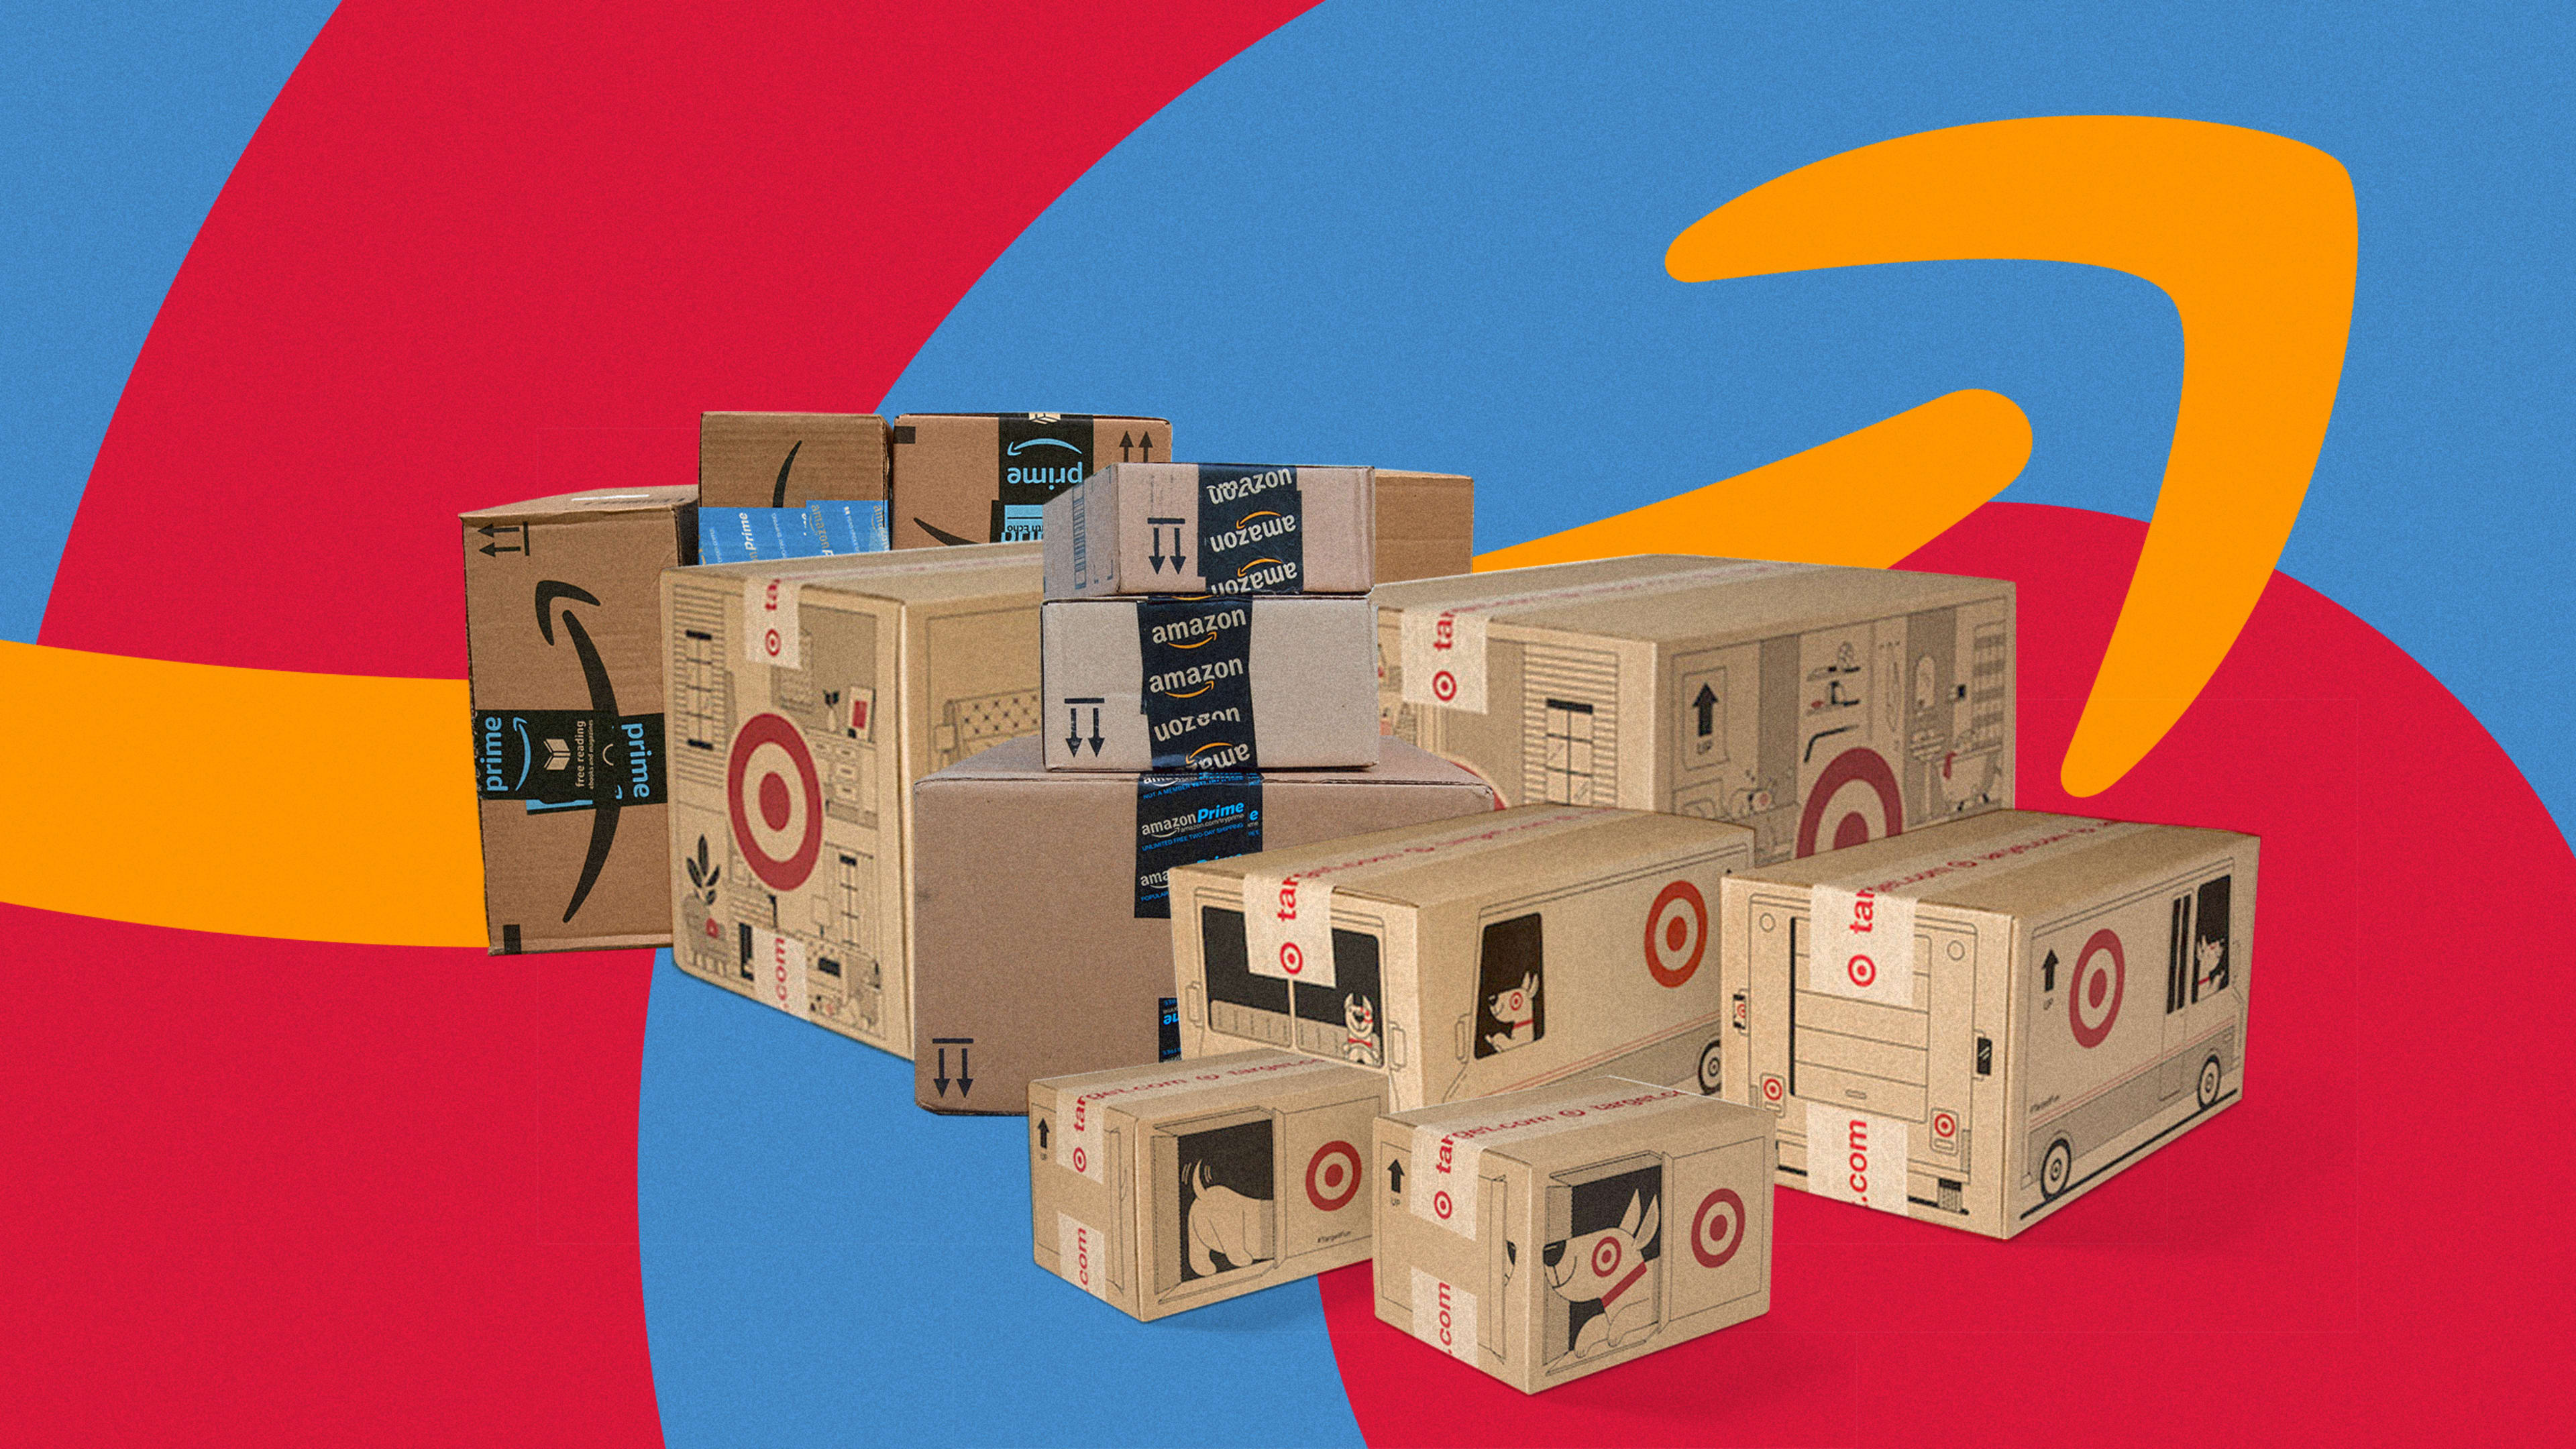 The hot new product Amazon and Target are obsessing over? Boxes